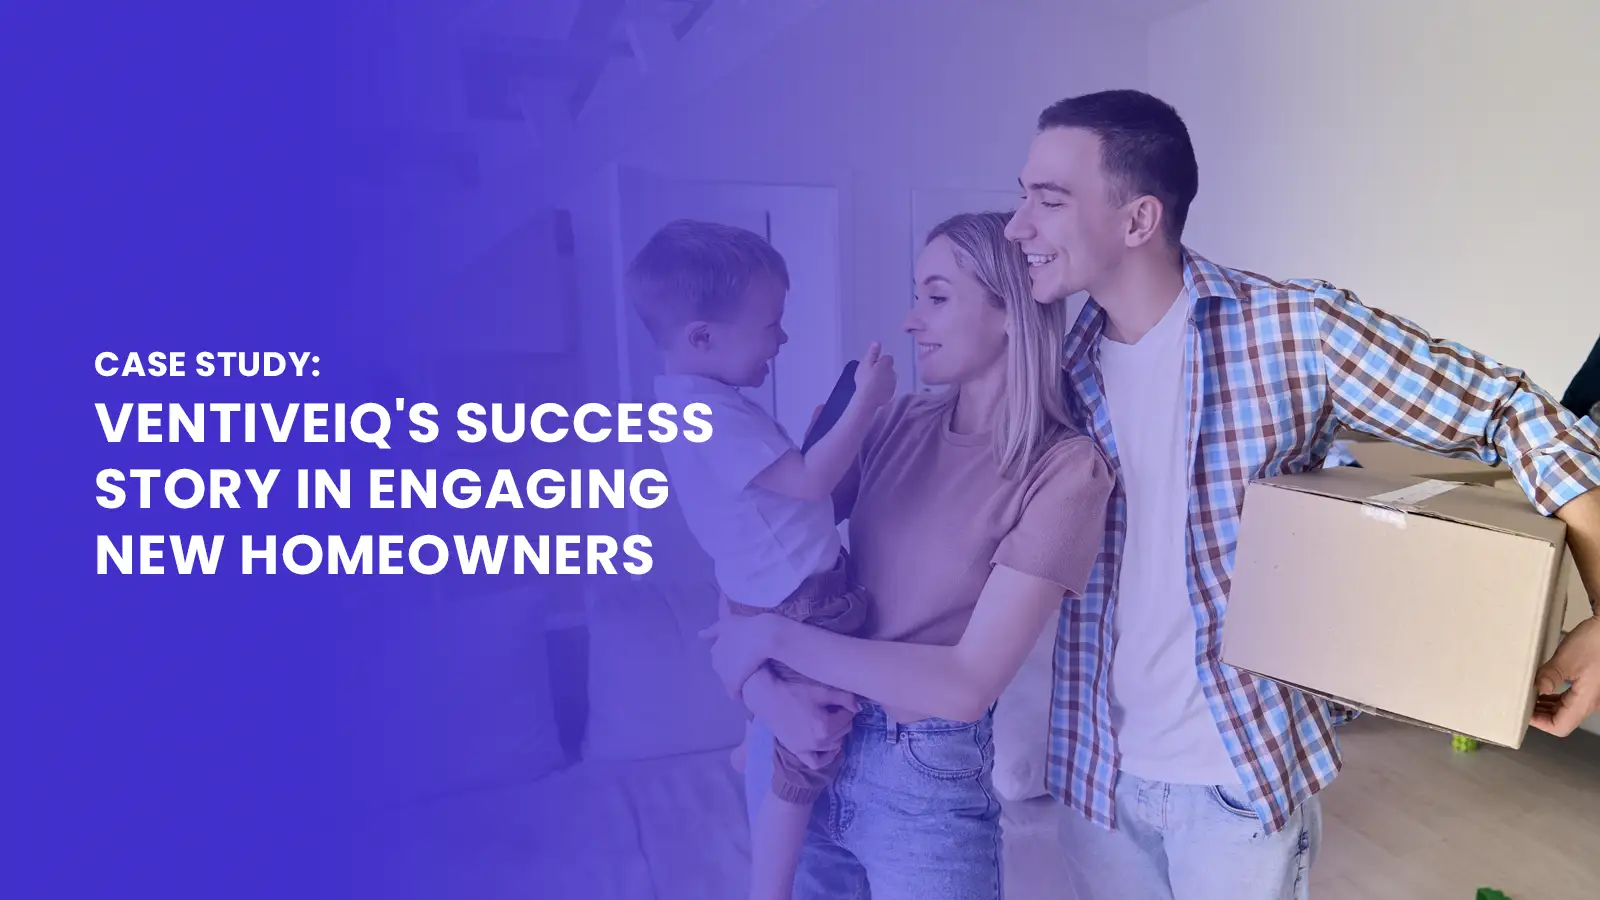 VentiveIQ's Success Story in Engaging New Homeowners